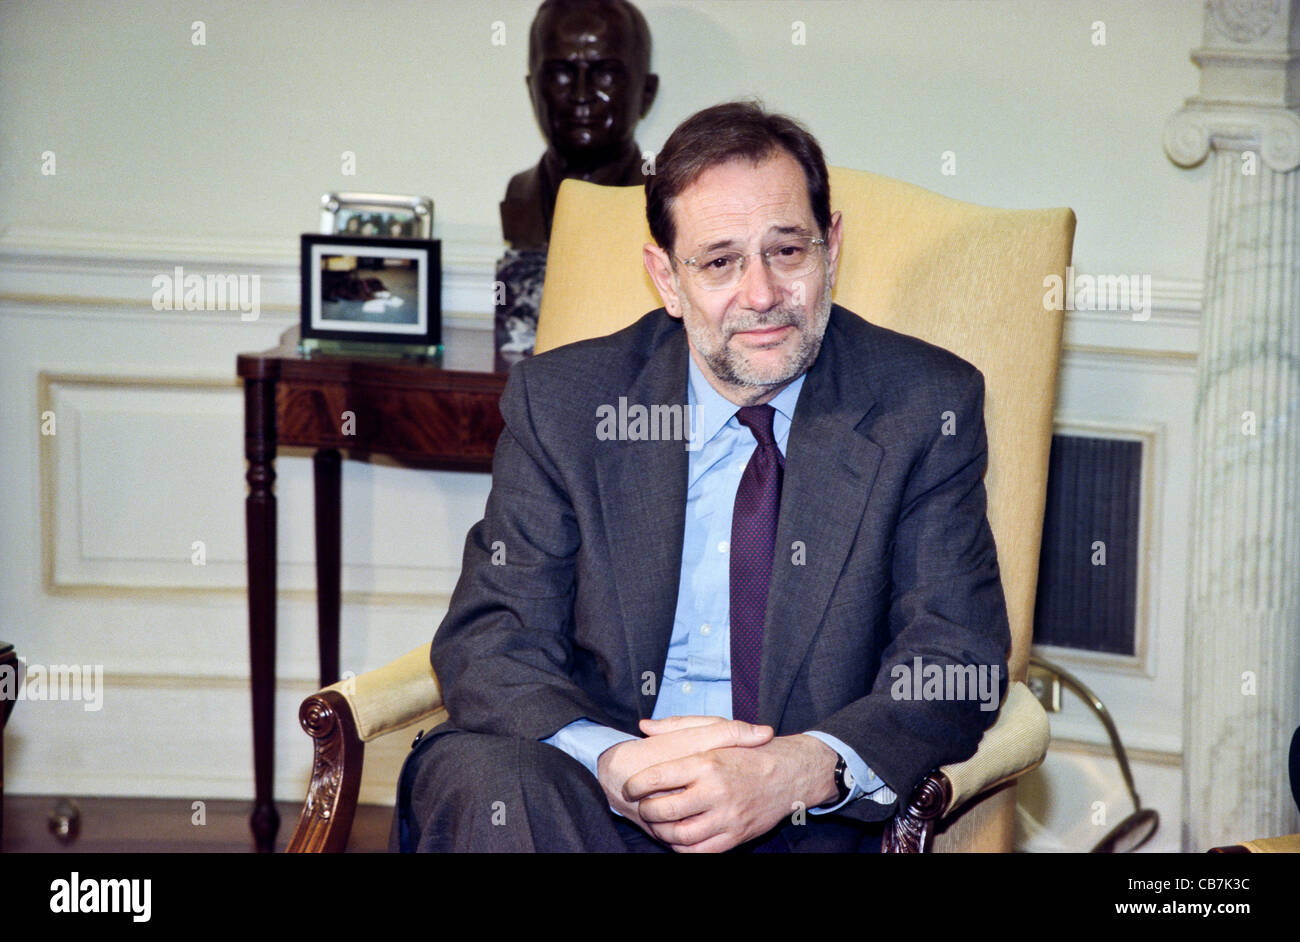 NATO Secretary General Javier Solana during a meeting with US President Bill Clinton March 15, 1999 in the Oval Office at the White Hose in Washington, DC. During the meeting President Clinton said he is optimistic at the news that the Kosovaars are willing to sigh a peace agreement with the Serbs. Stock Photo